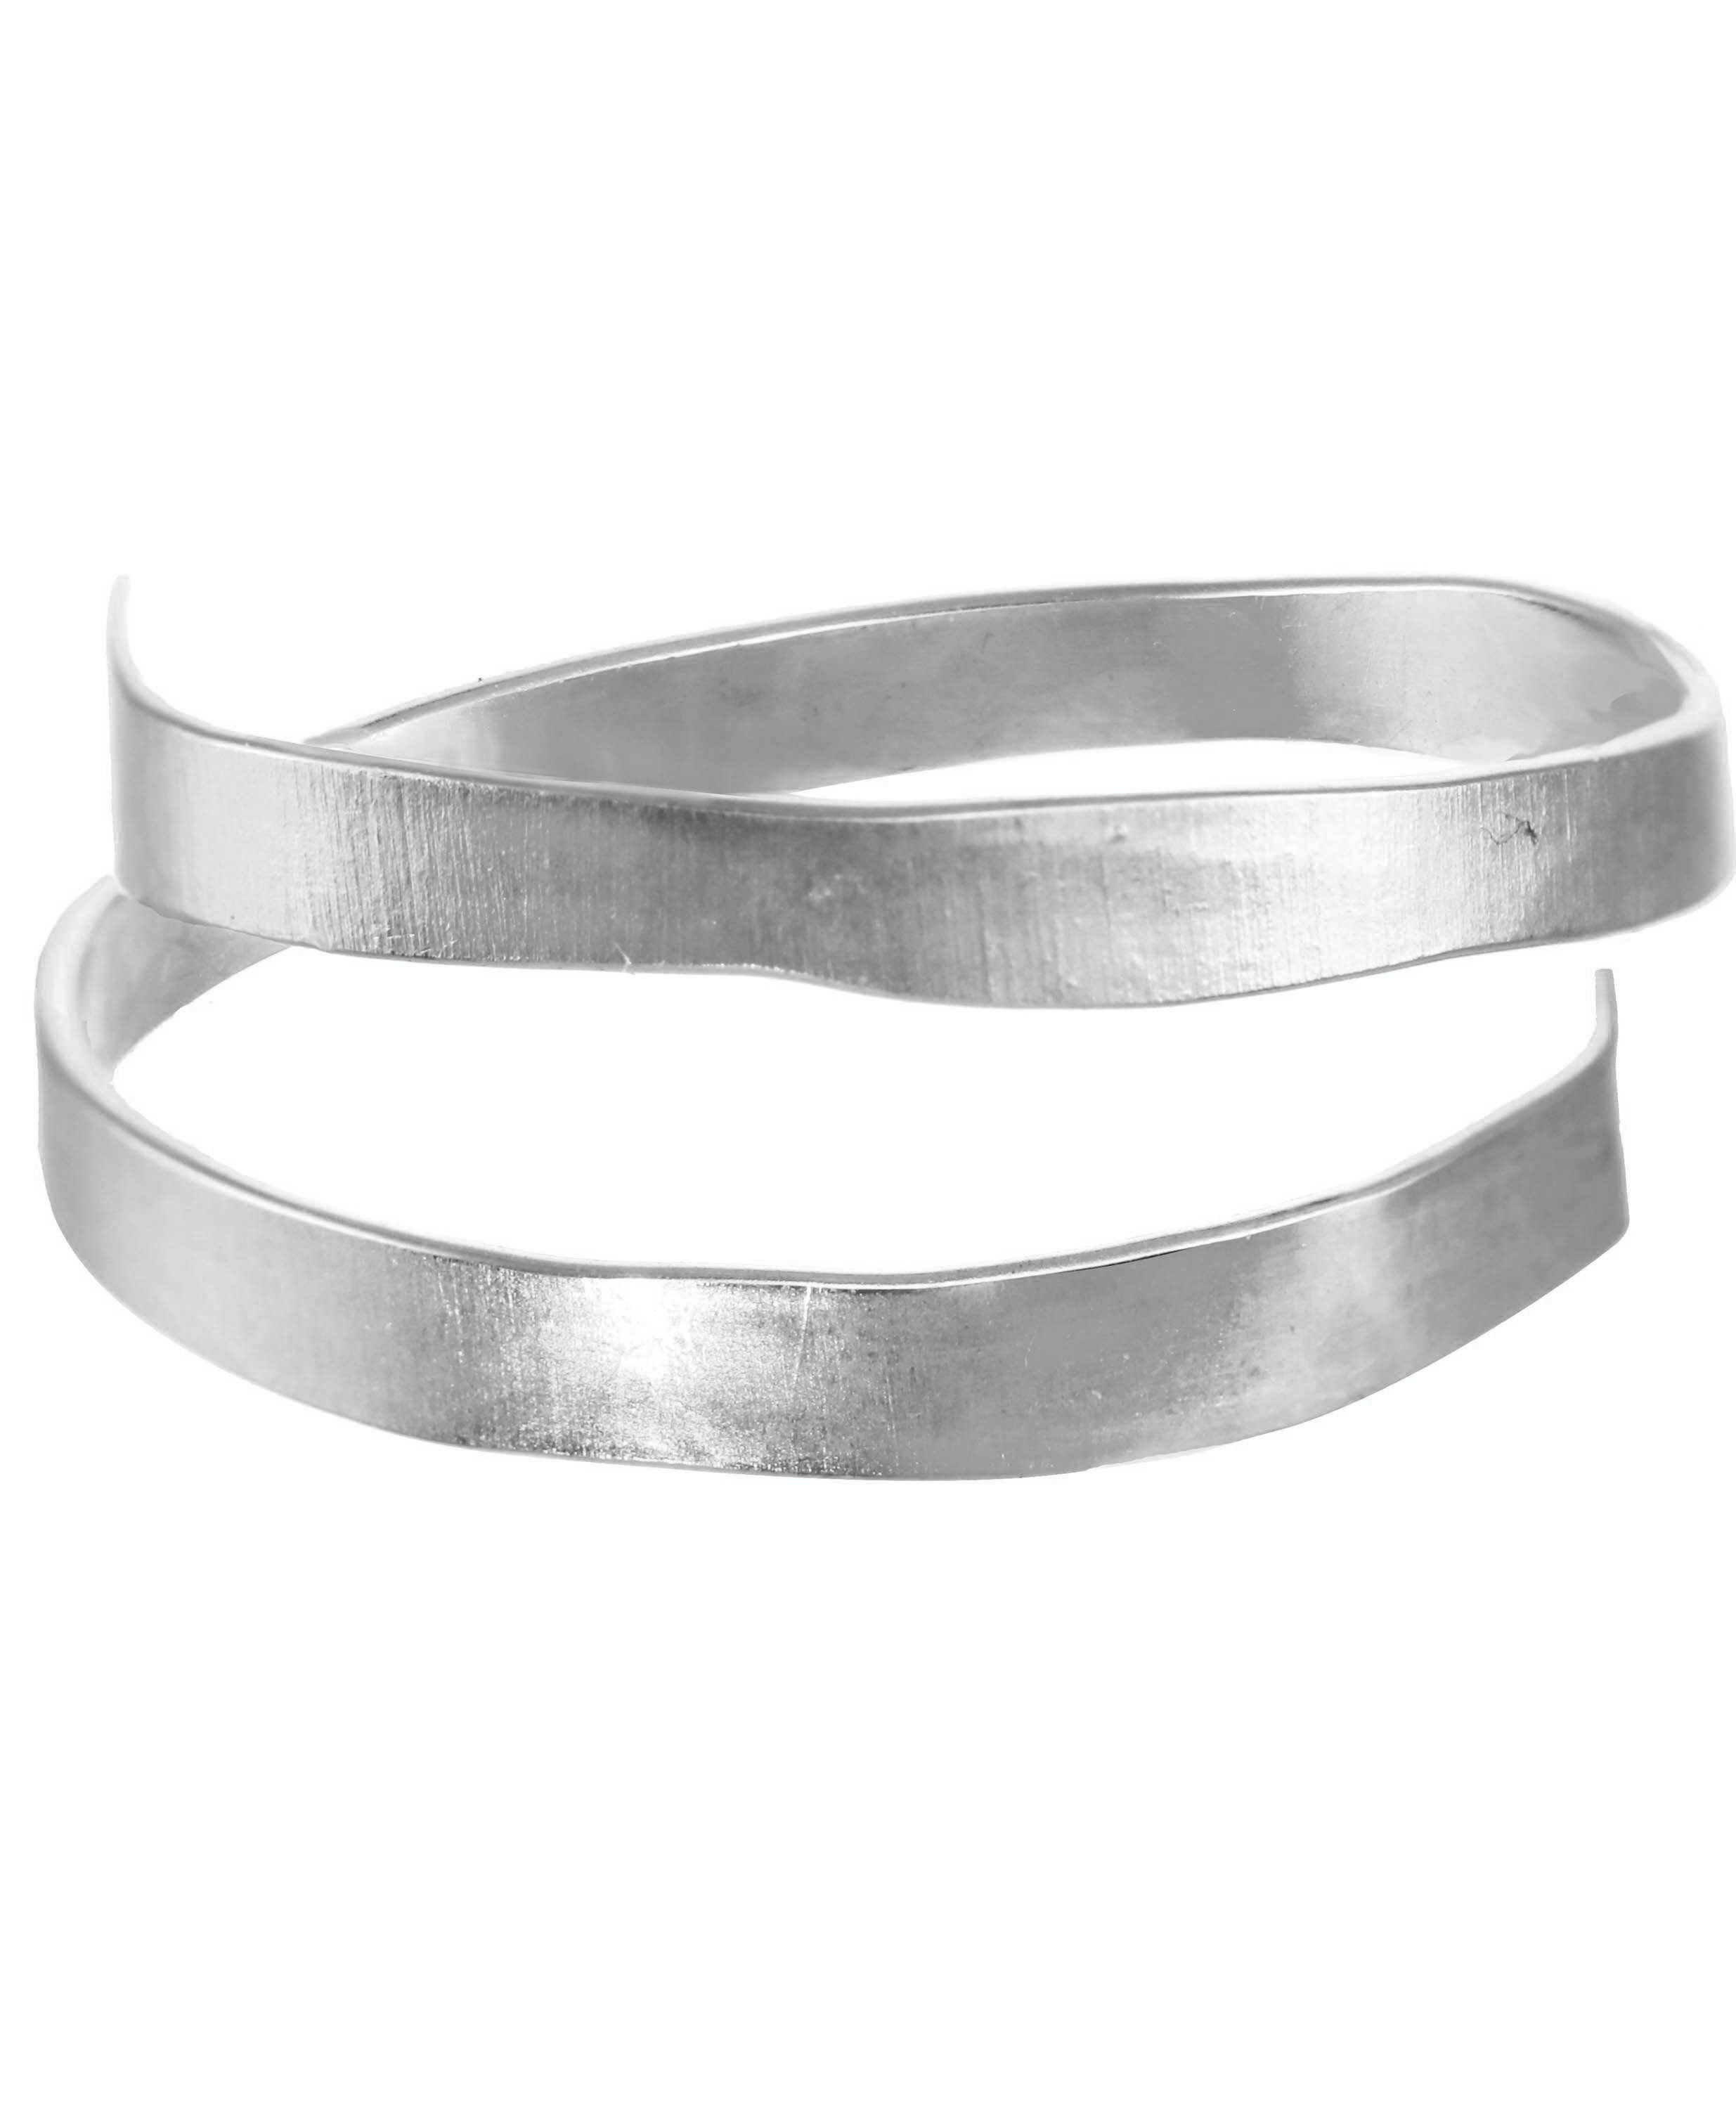 Evelyn Ring by KOZAKH. A spiral style ring, crafted in Sterling Silver.